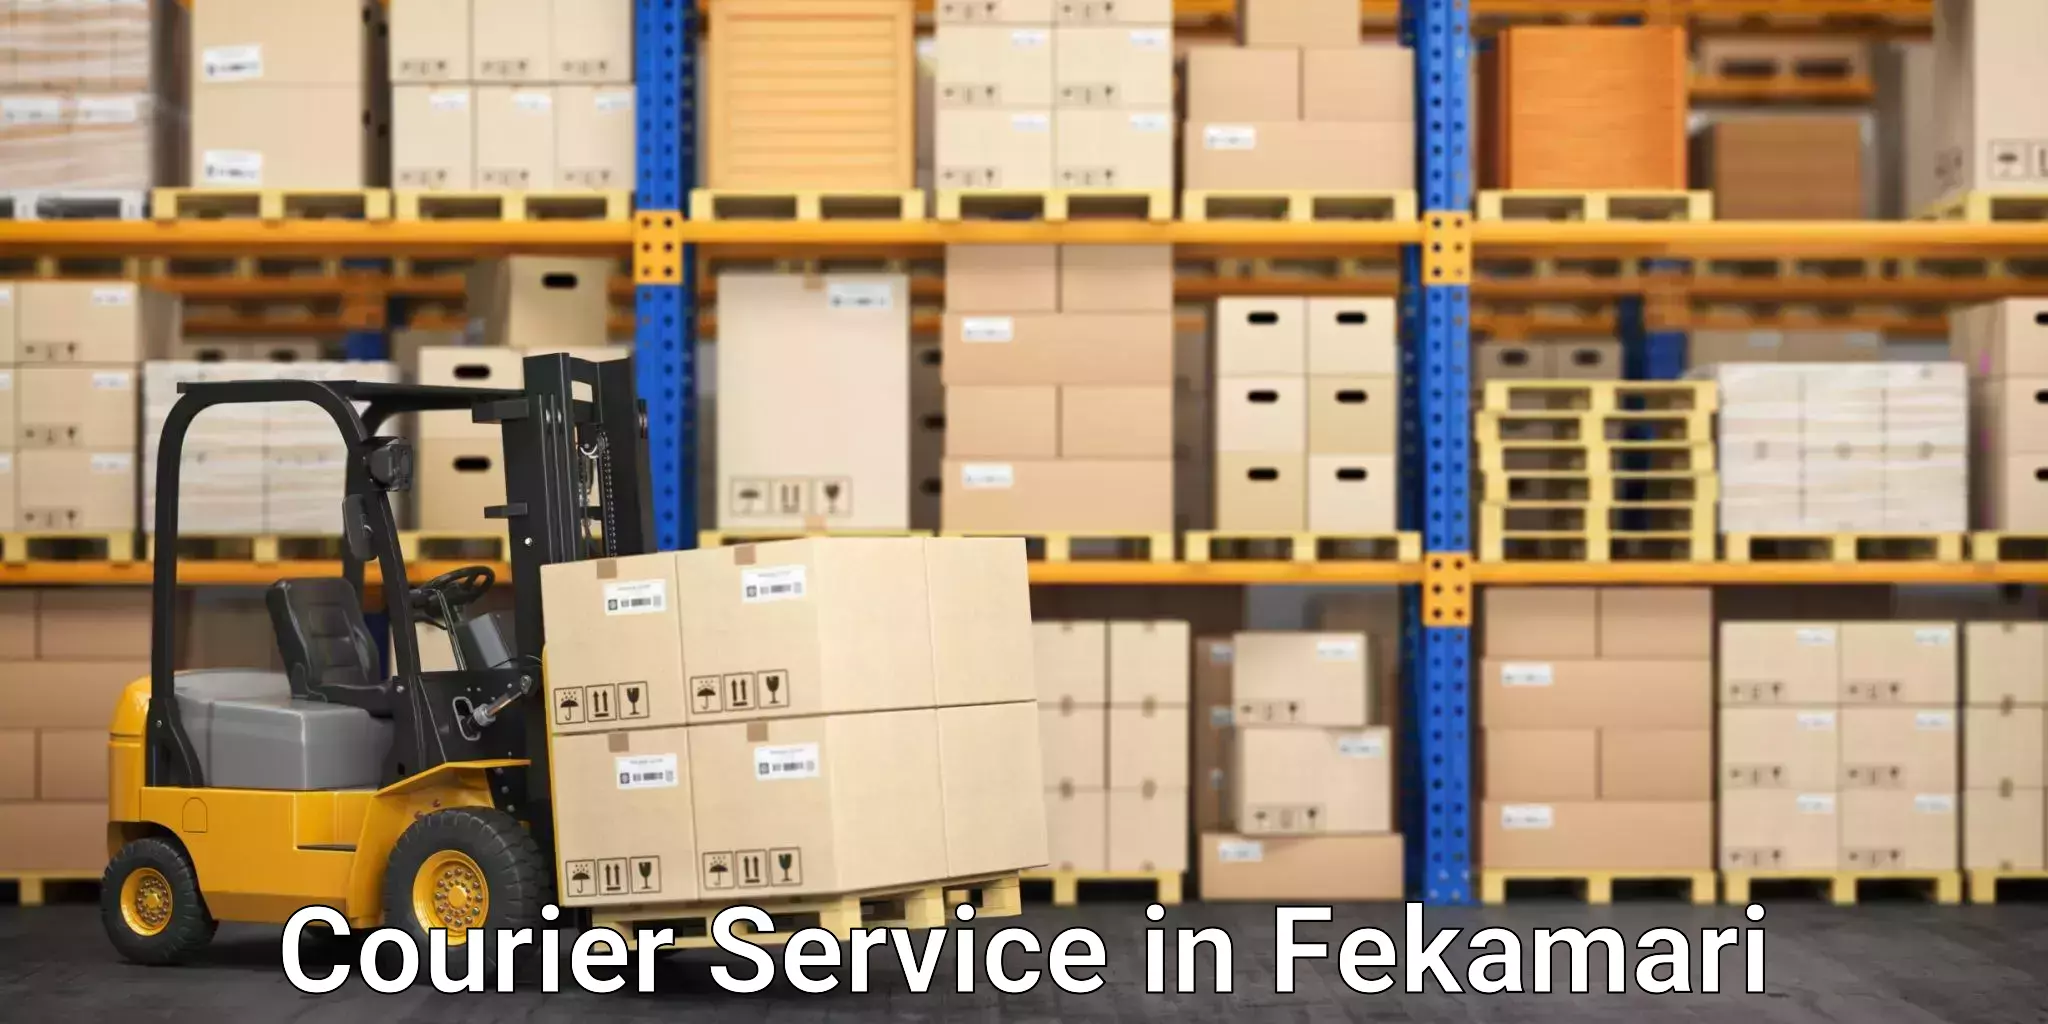 Automated parcel services in Fekamari